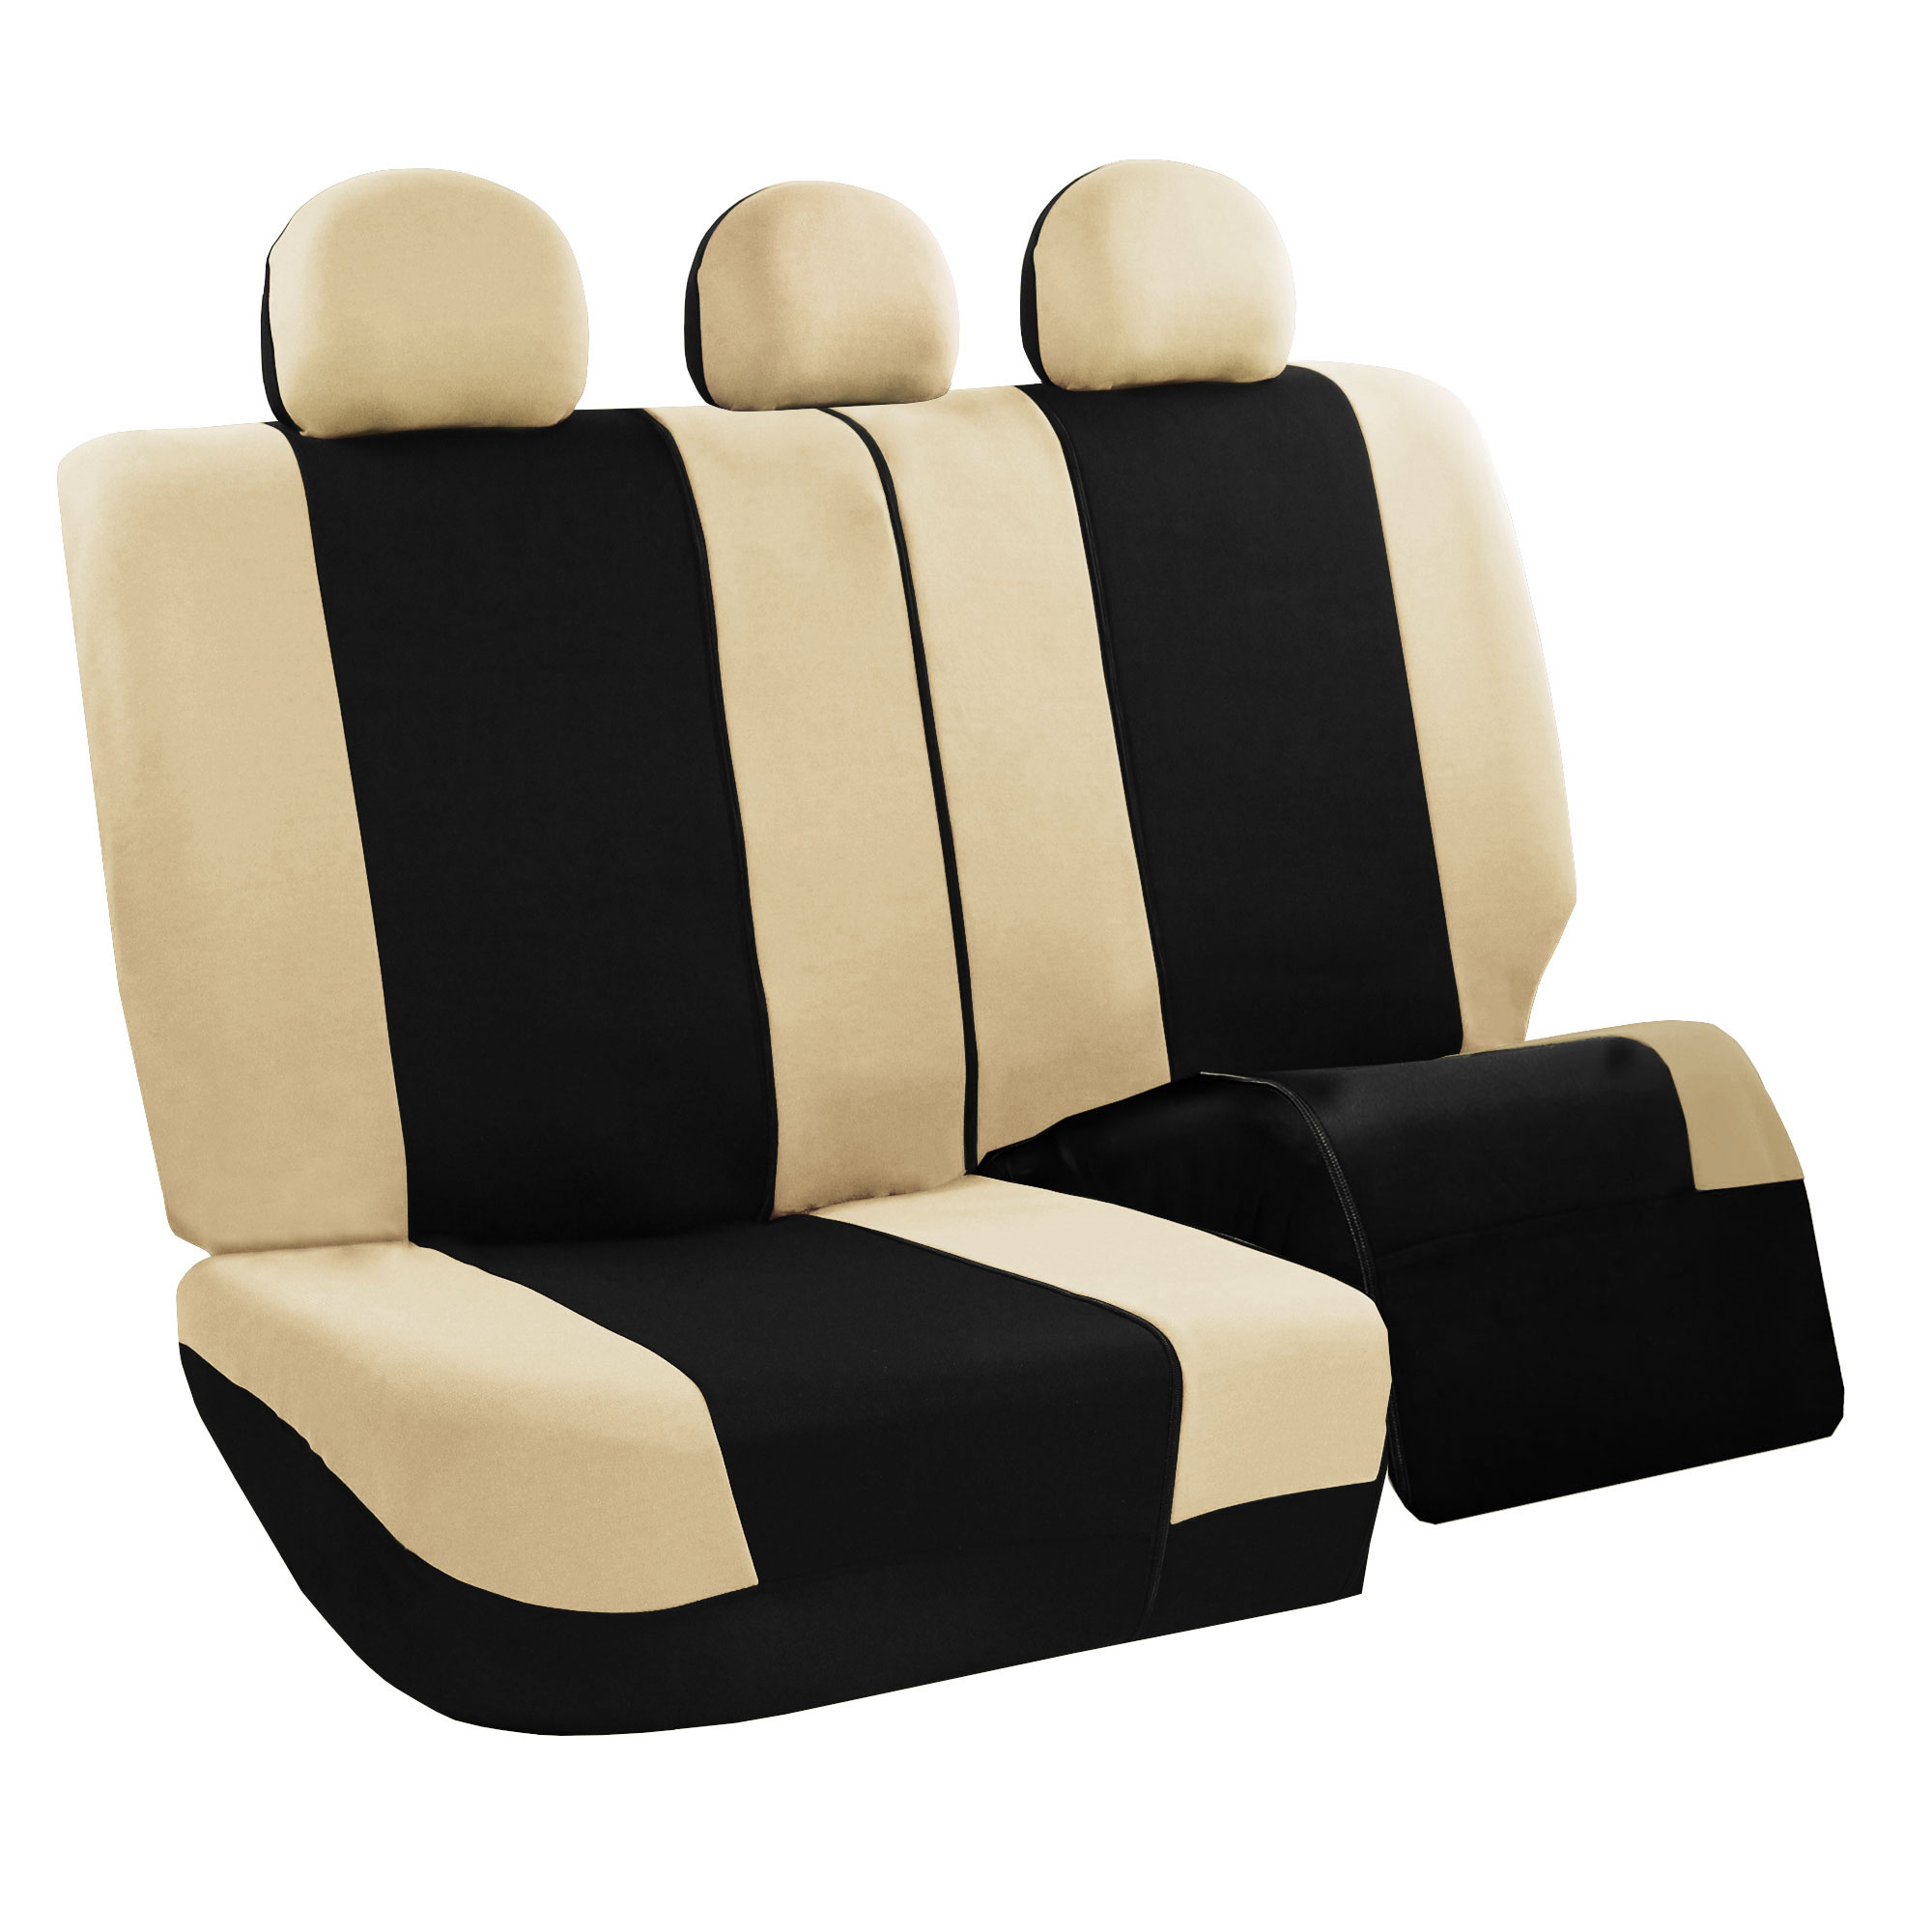 FH Group Auto Seat Cover For Car Truck SUV Van w/ Steering Cover Belt Pads Beige